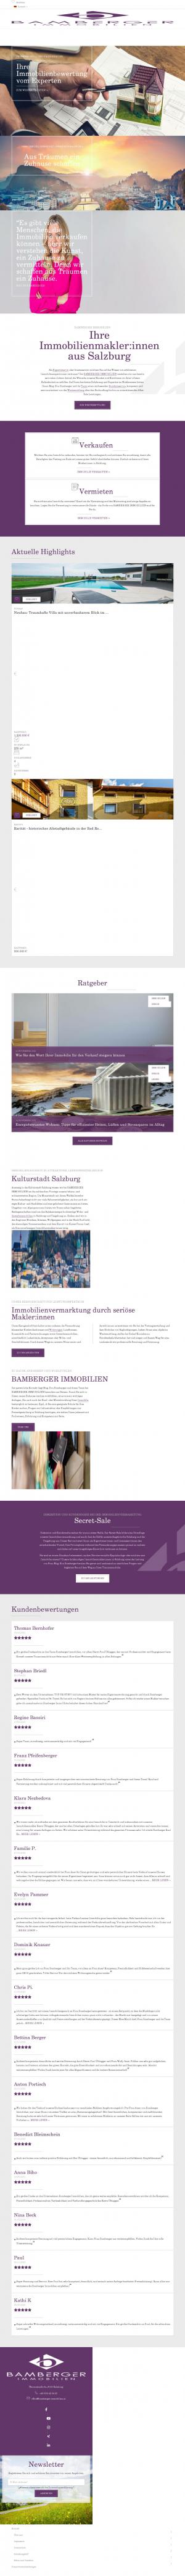 www.bamberger-immobilien.at